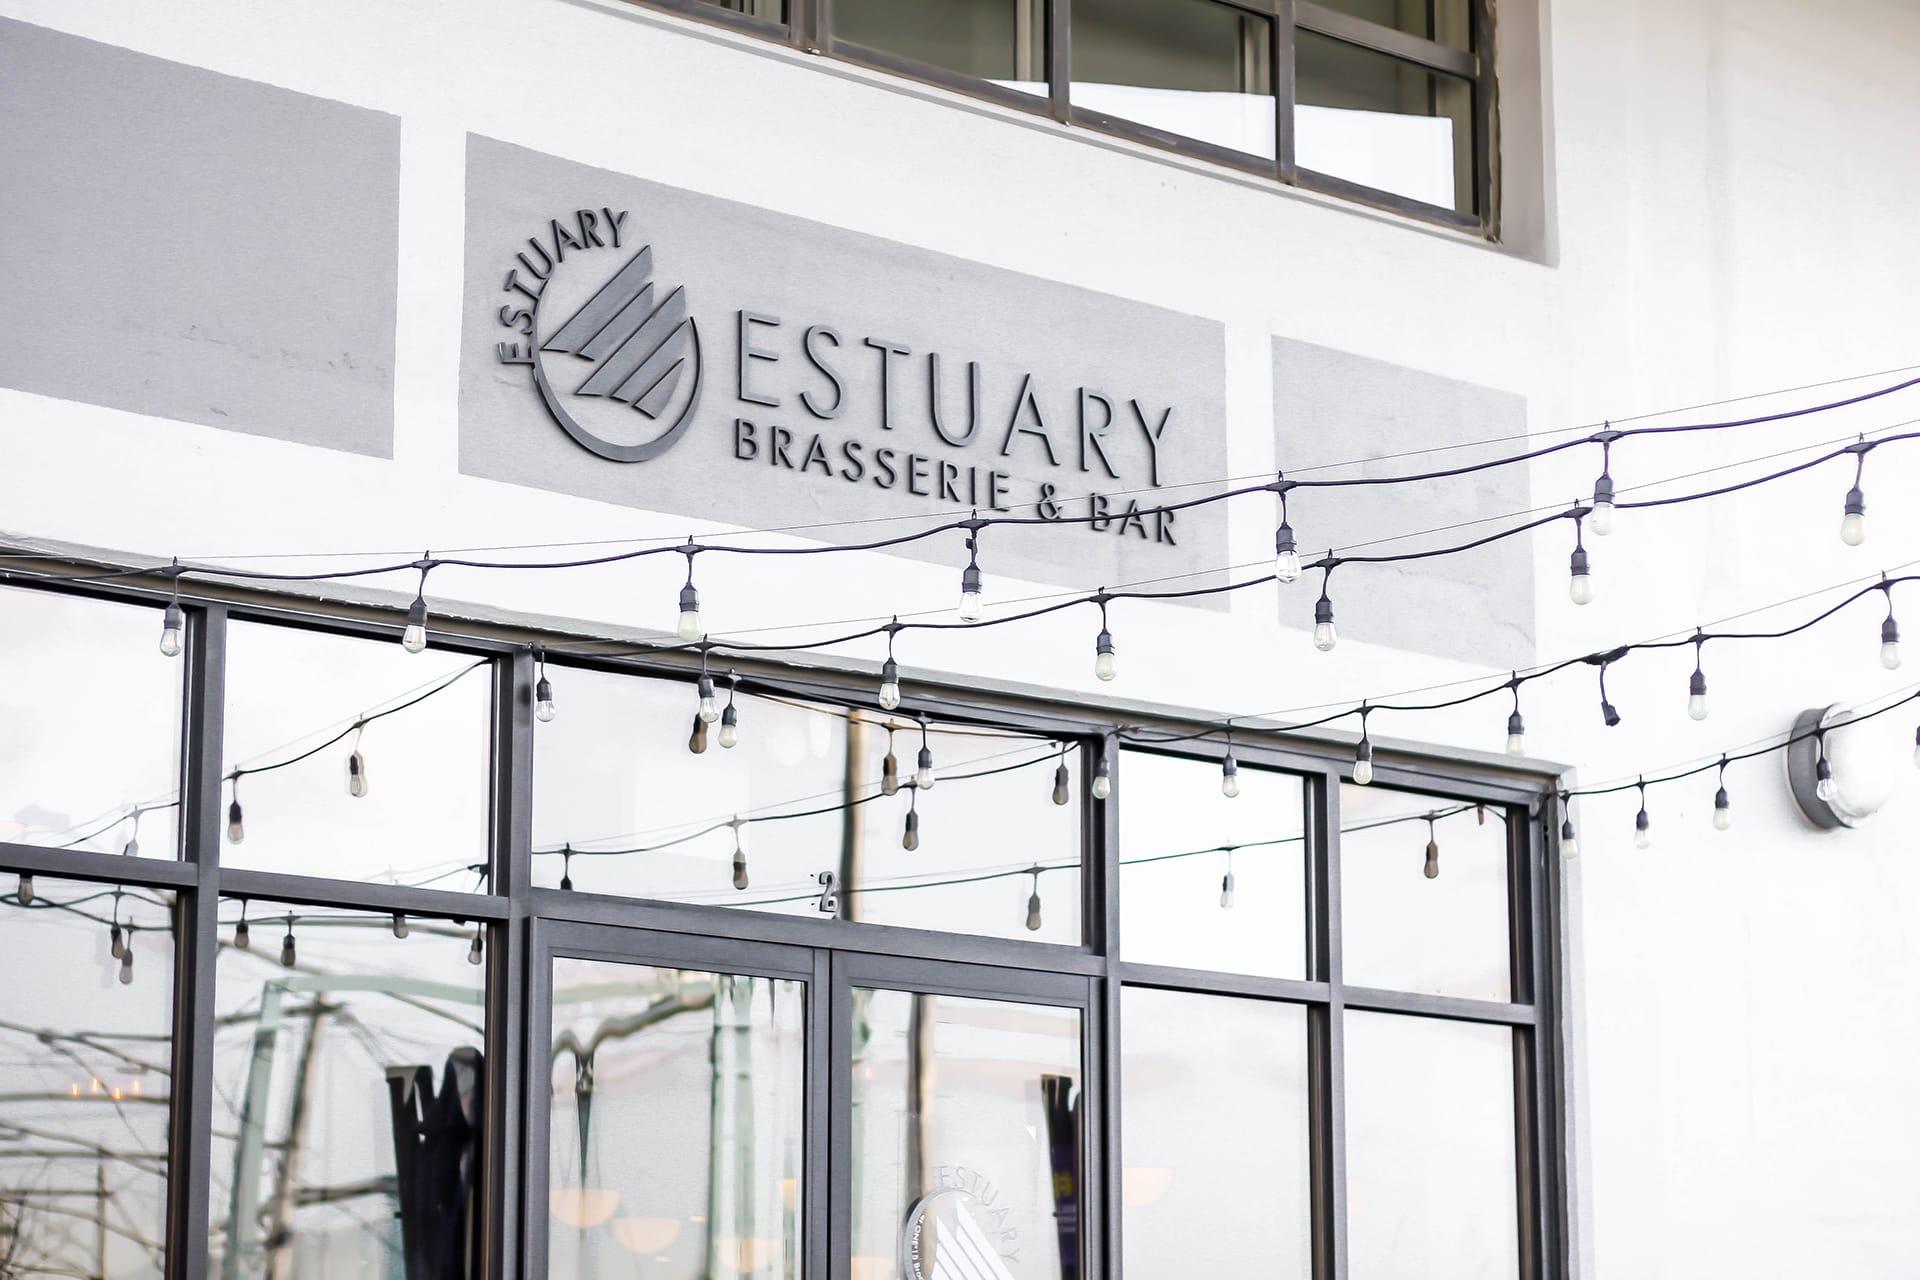 Exterior of the Estuary Brasserie & Bar with a row of string lights hanging in front of the door.